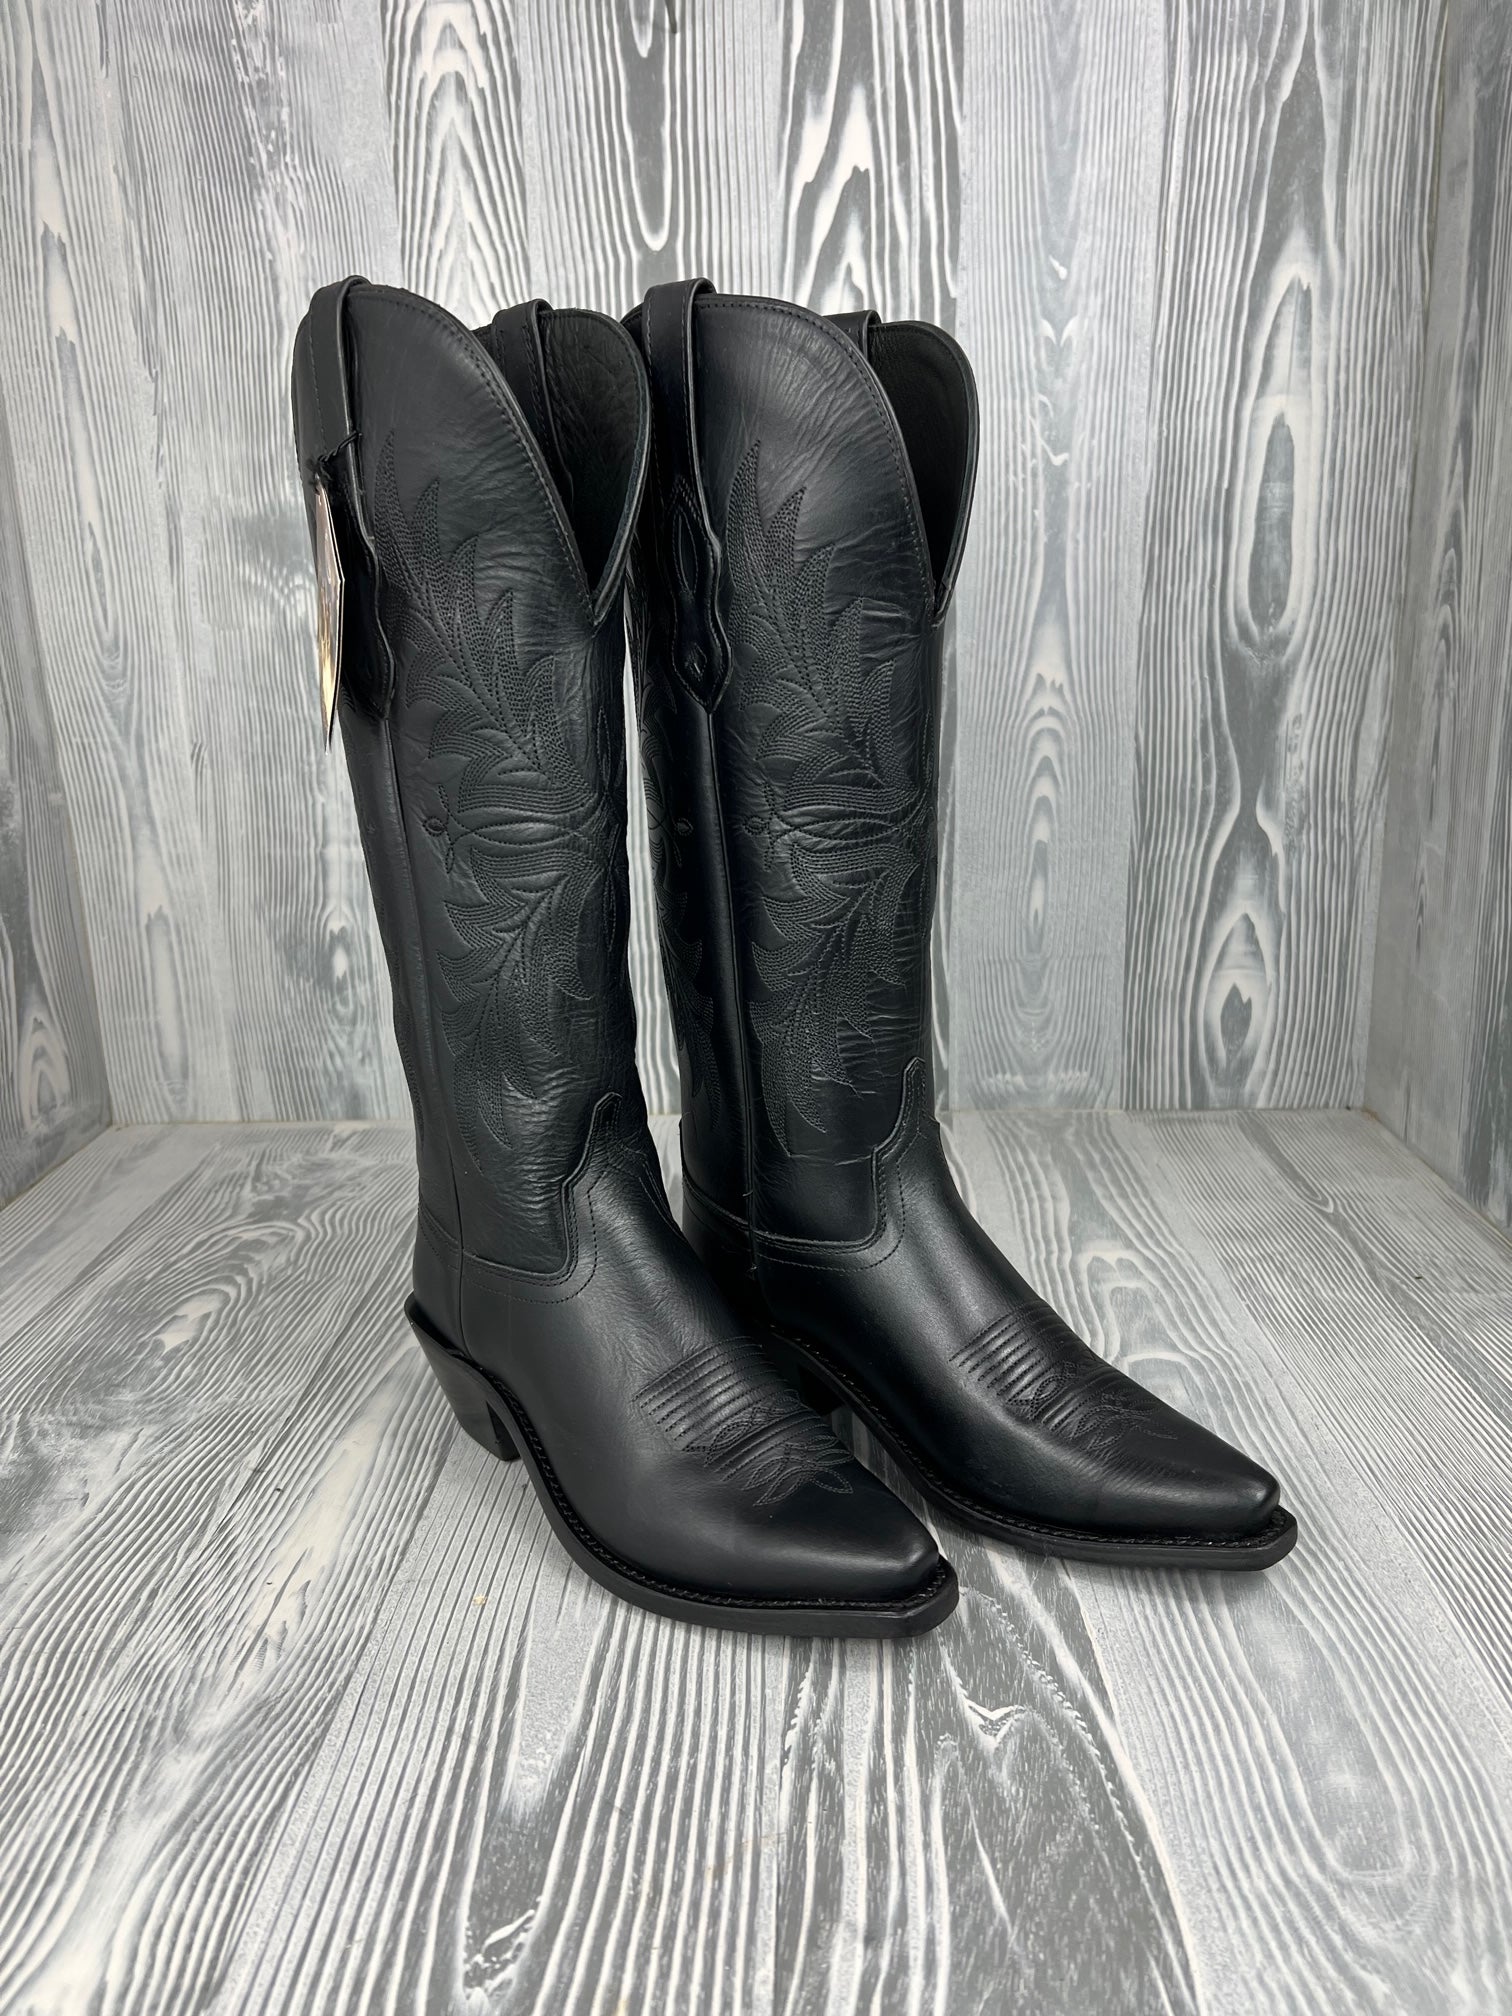 Women's Hey Dudes, Cowhide Hey Dudes, Western Shoes, Black and